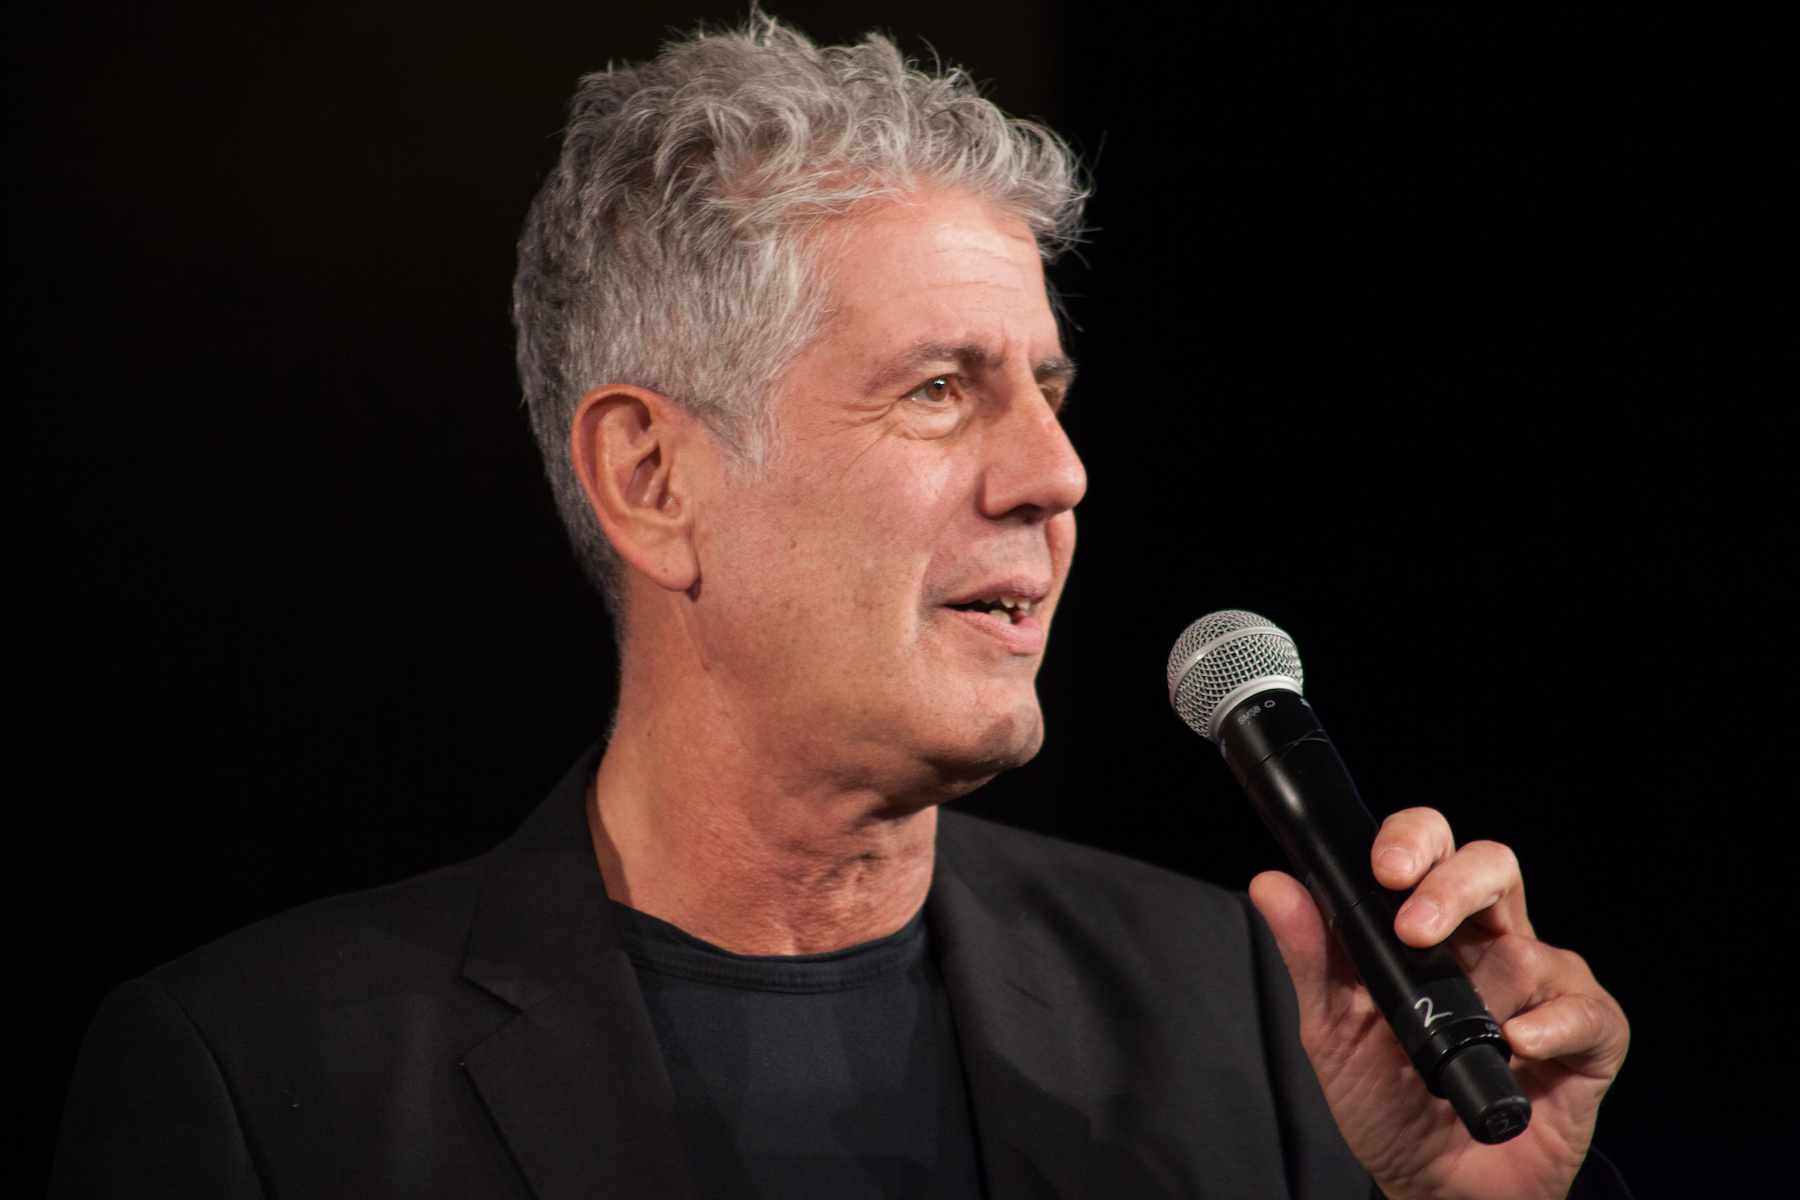 Anthony Bourdain at Capital Food Fight 2014 at the Ronald Regan Building and International Trade Center Washington DC | Photo by DC Food Photographer Jay Snap Snap